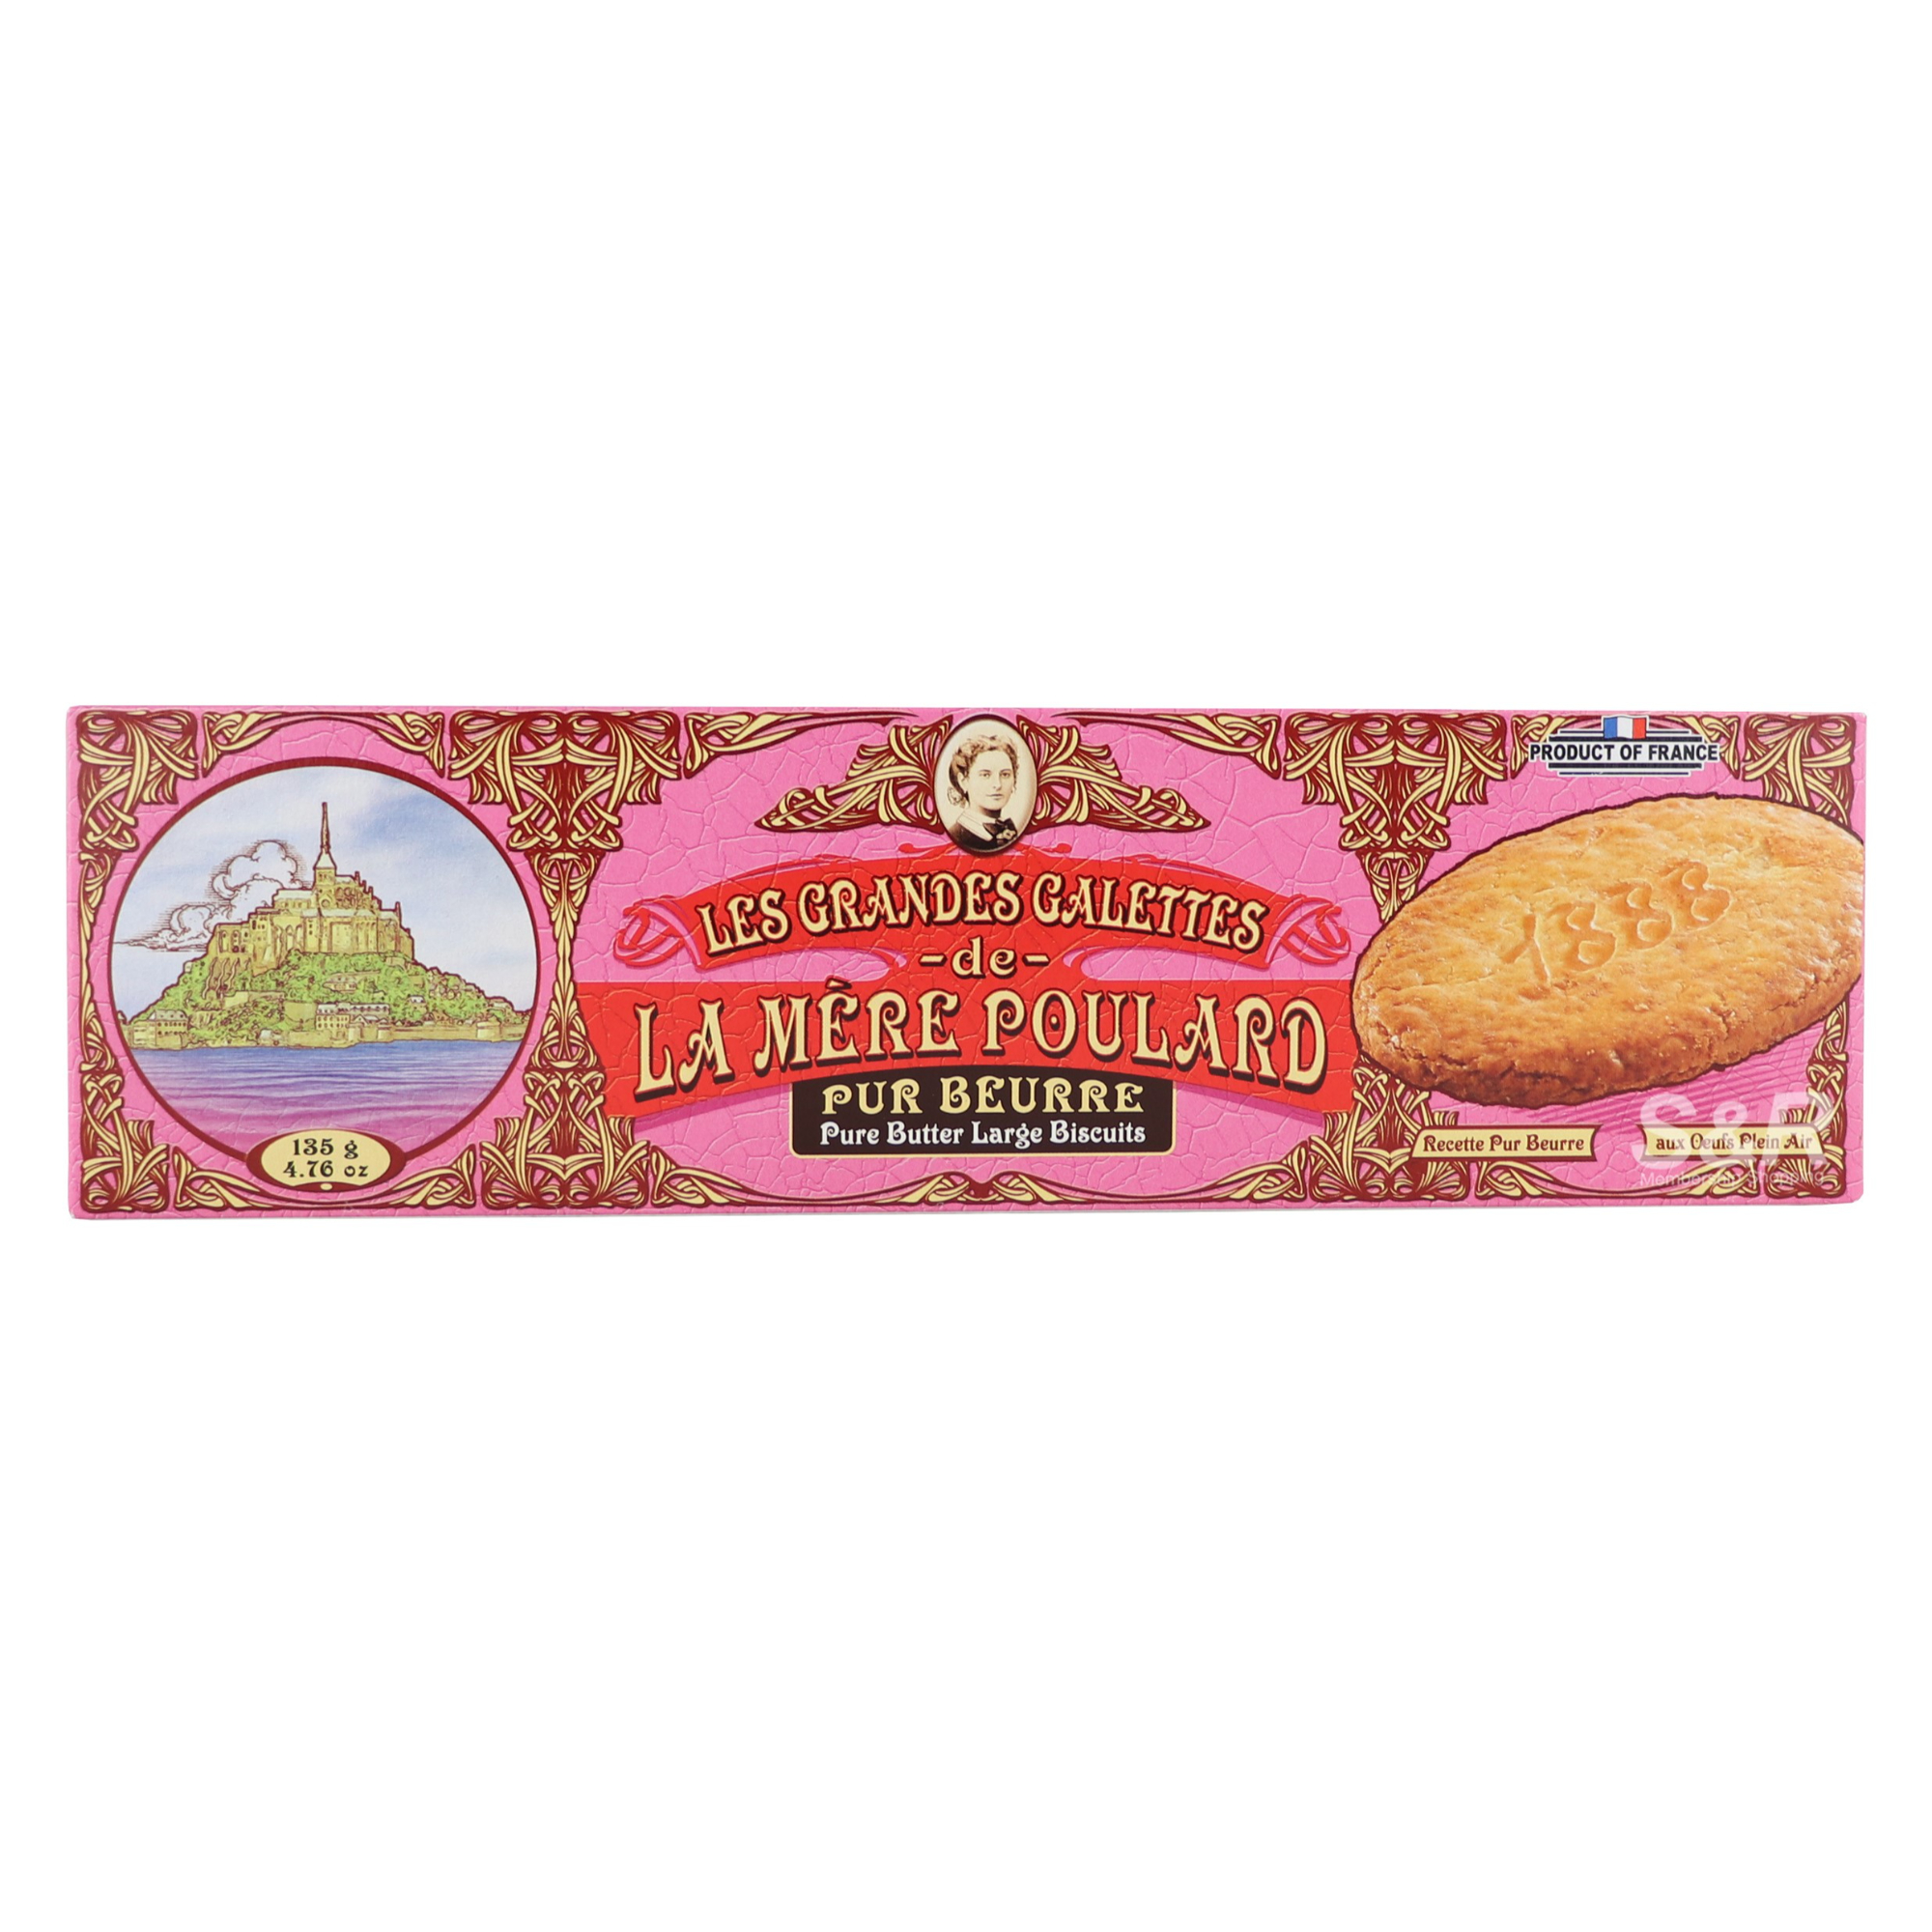 La Mere Poulard Pure Butter Large Biscuits 135g